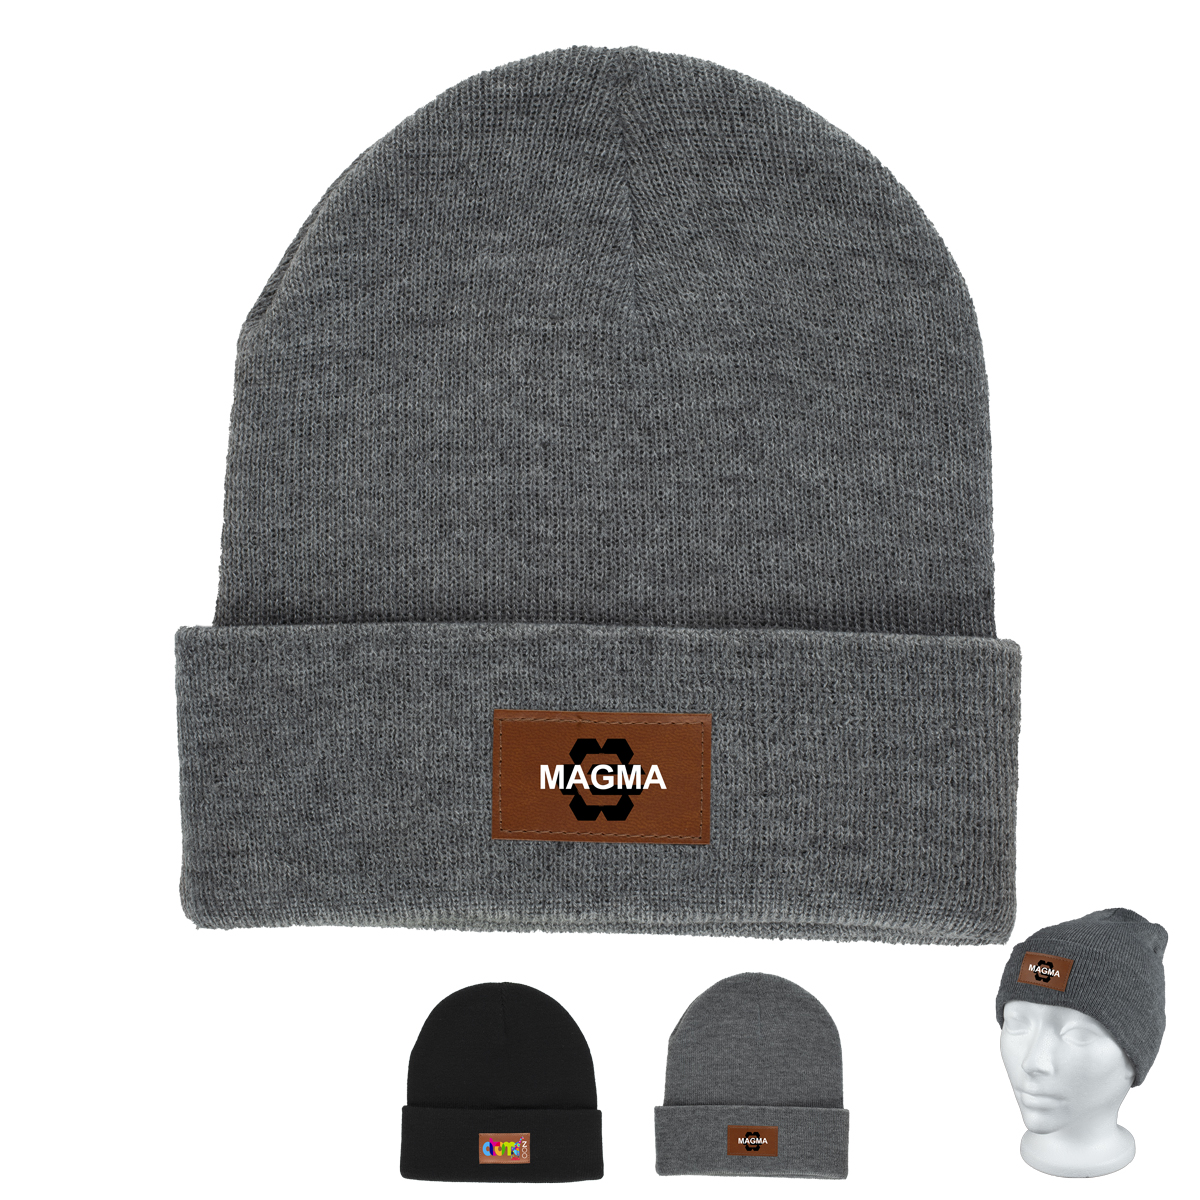 "TIBURON" Fashion and Performance Knit Cuffed Beanie with Patch